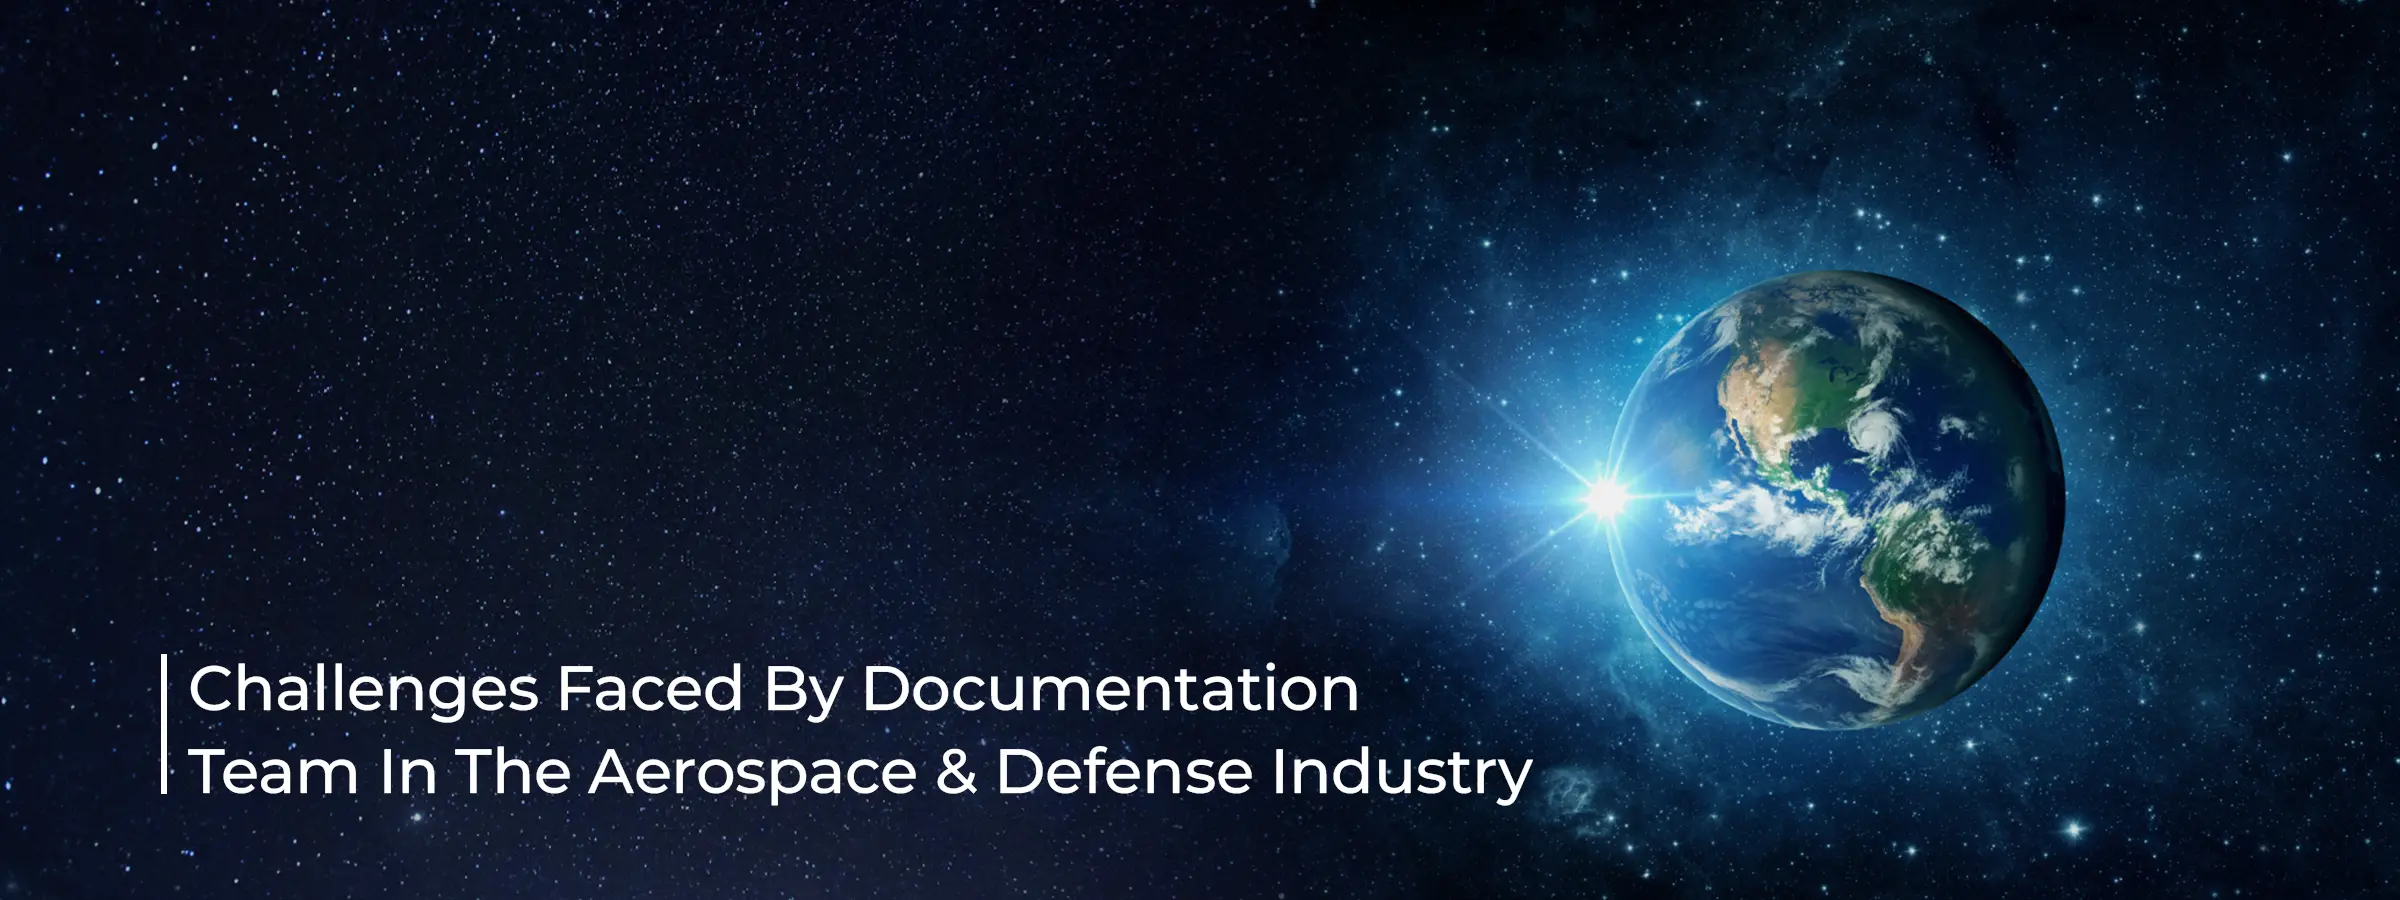 challenges-faced-by-documentation-team-in-the-aerospace-and-defense-industry